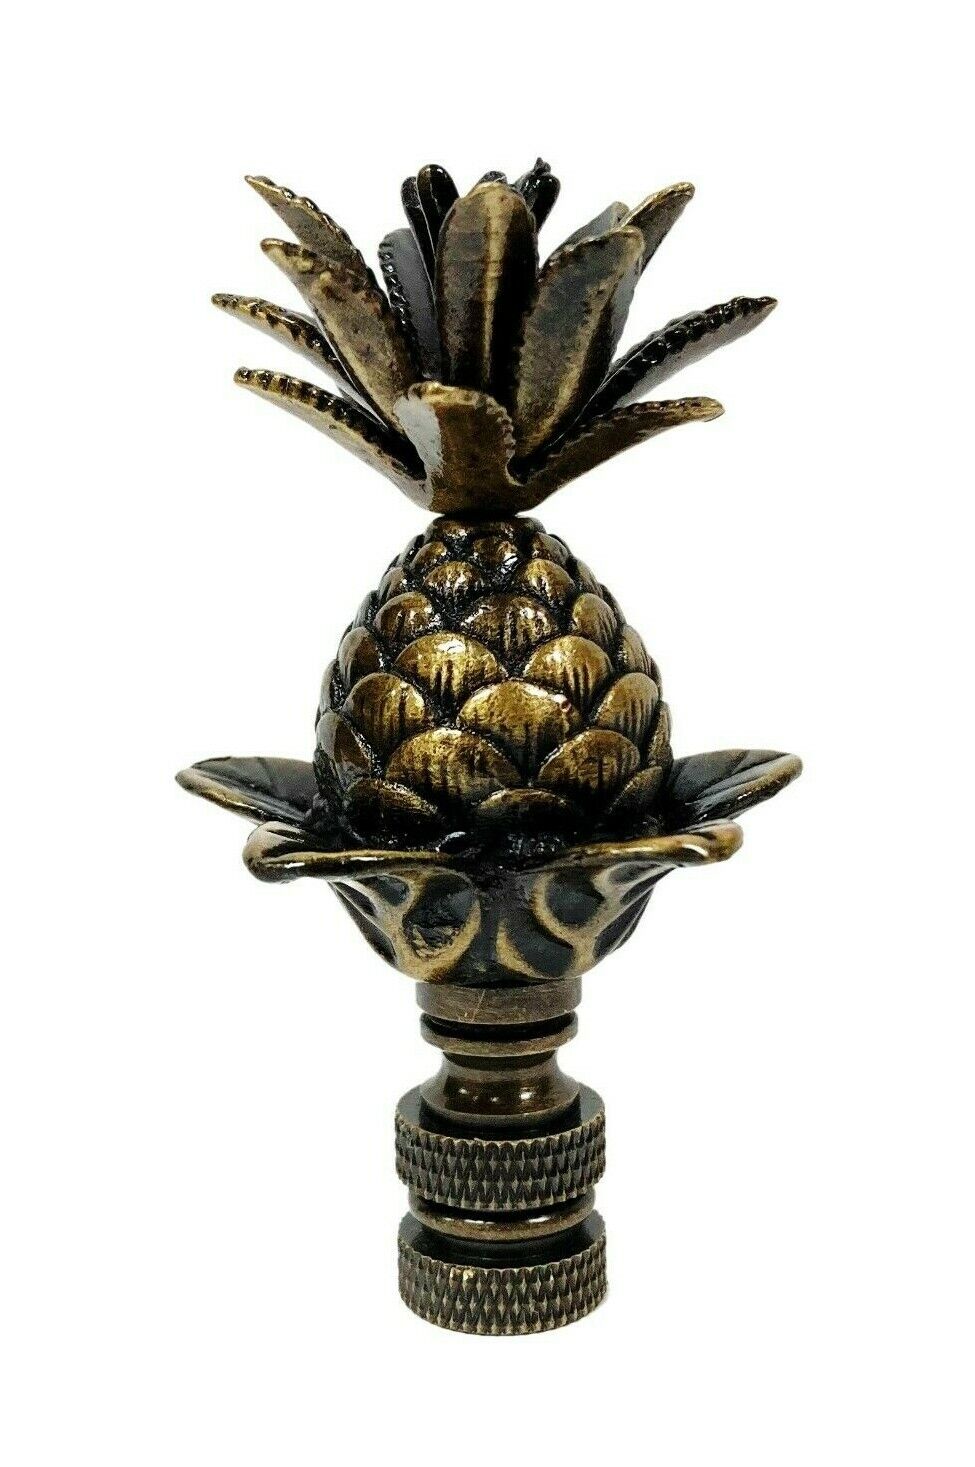 Lamp Finial-LARGE PINEAPPLE-Aged Brass Finish, Highly detailed metal casting